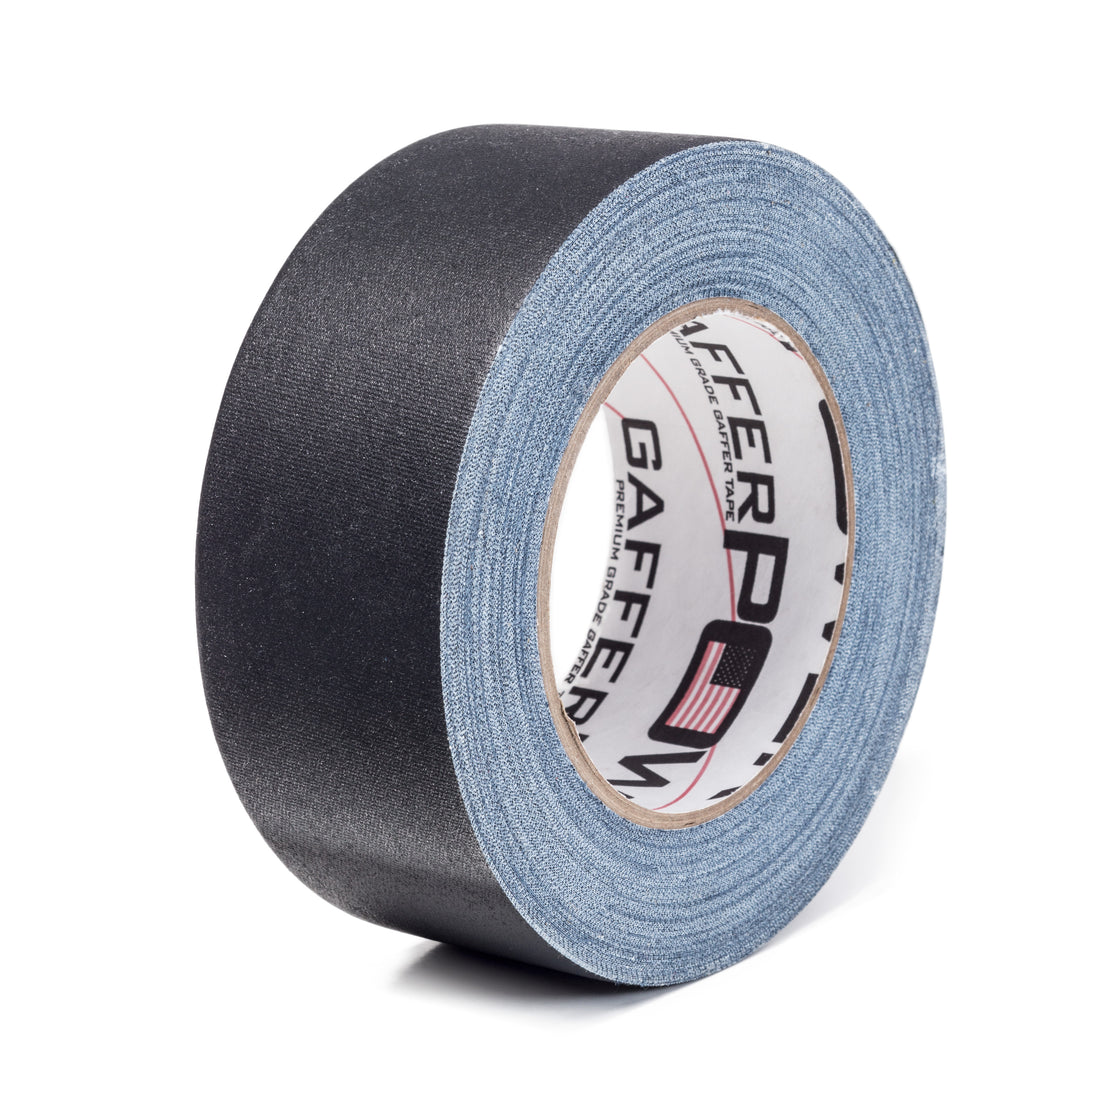 What Gives 'Gaffer Tape' Its Incredible Strength?